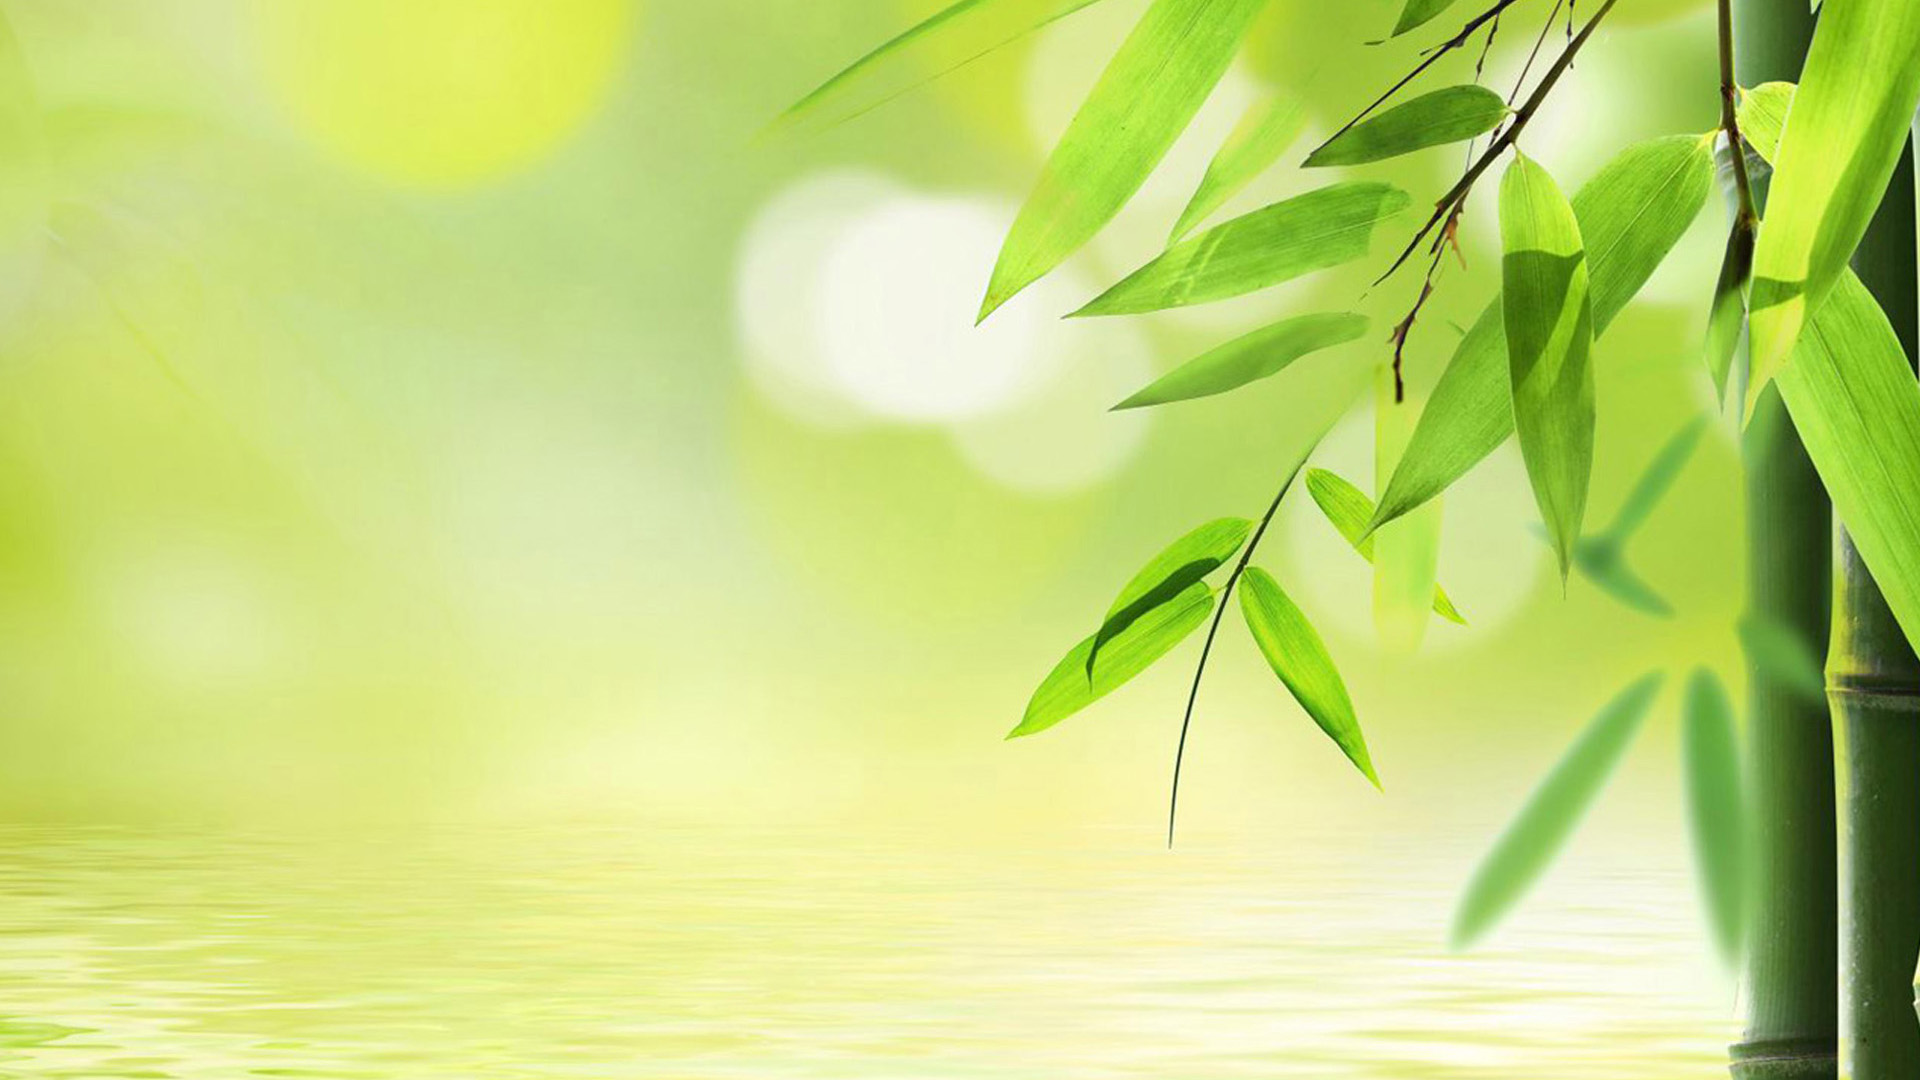 Fresh green bamboo wallpaper Green Backgrounds Pictures and images